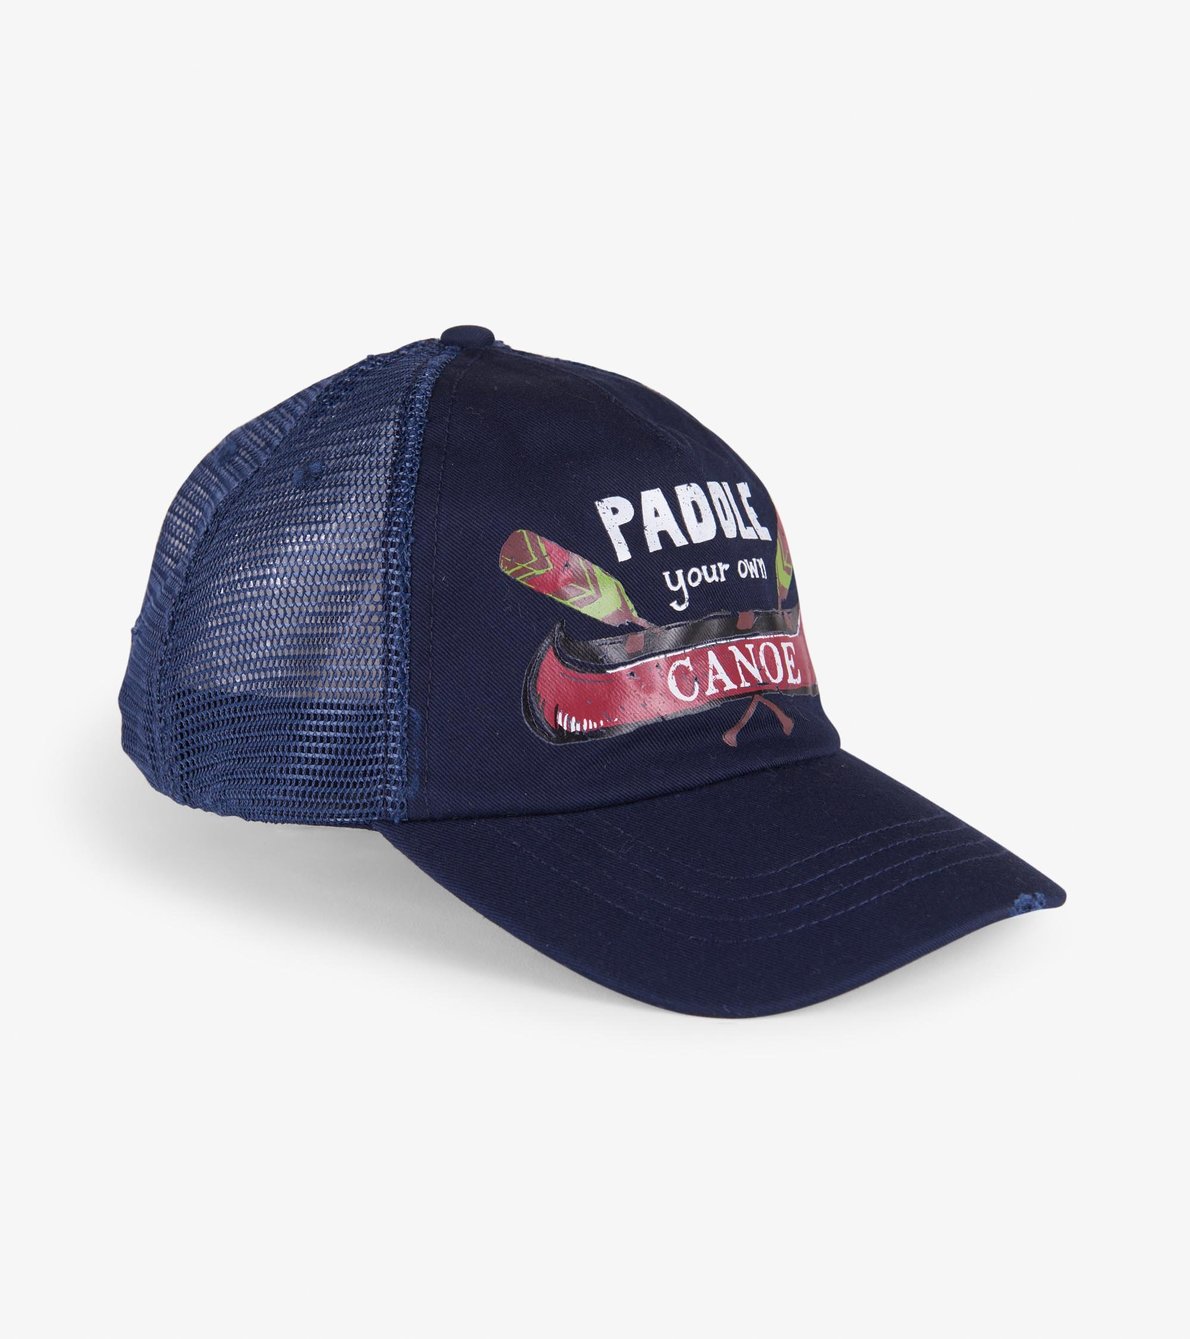 View larger image of Paddle your own Canoe Adult Baseball Cap